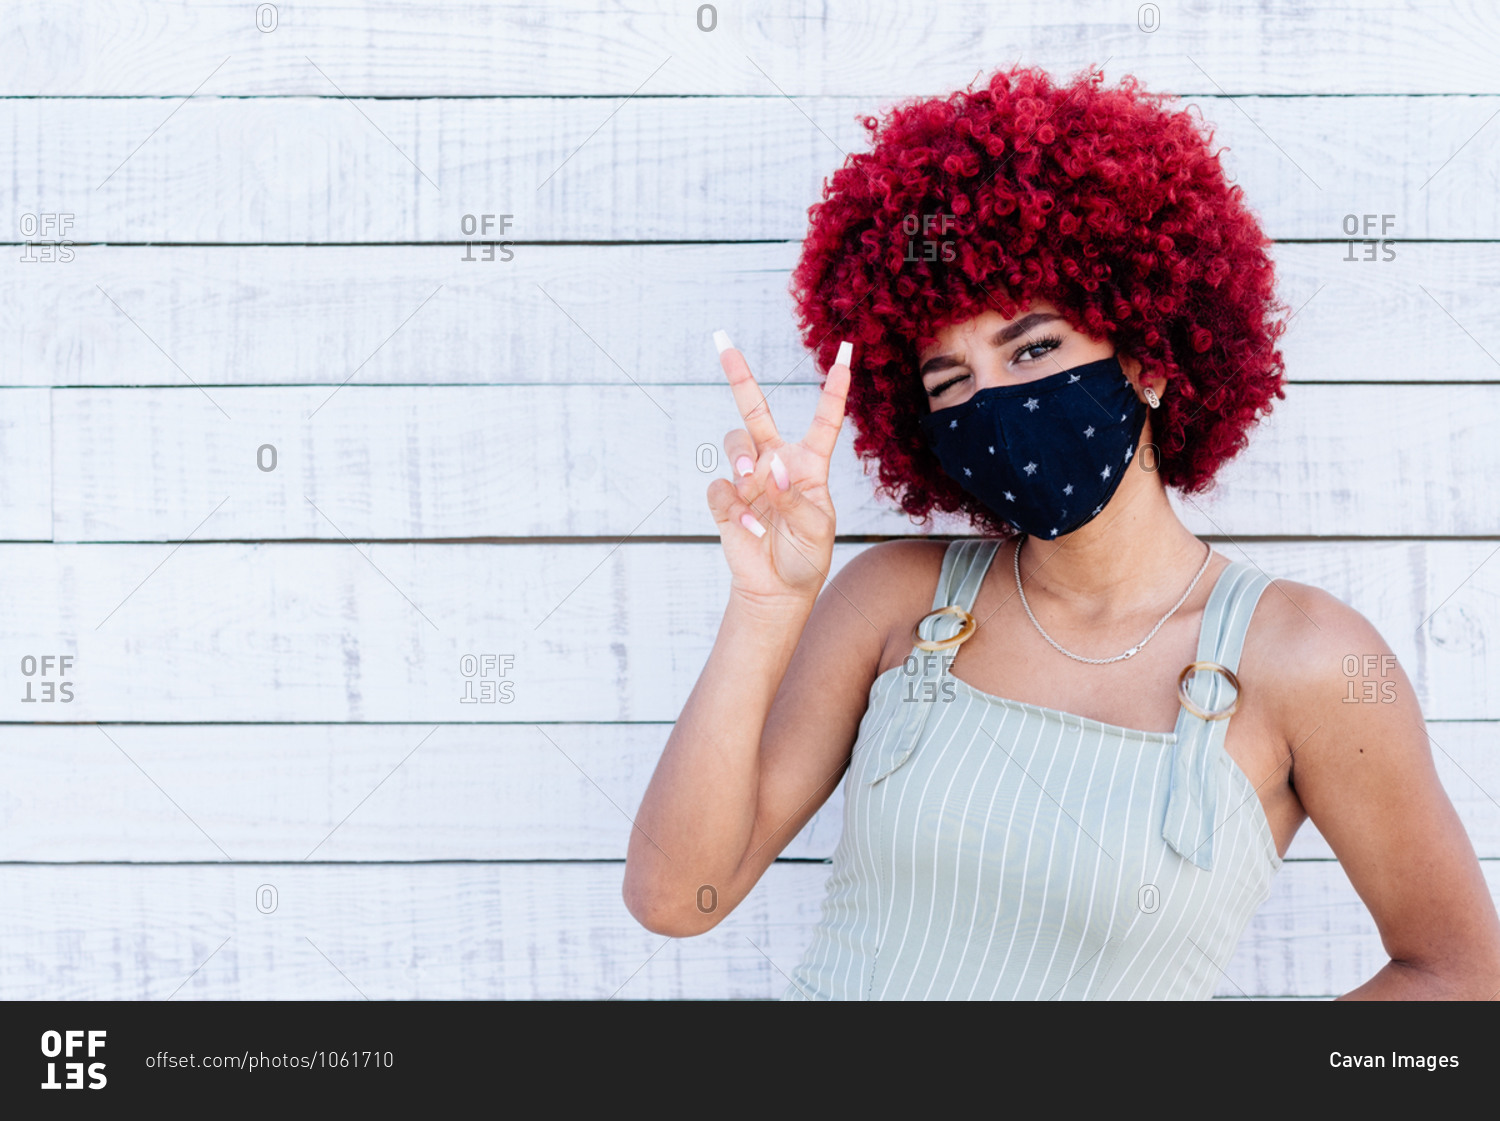 Latin women with mask and red hair showing a victory symbol.